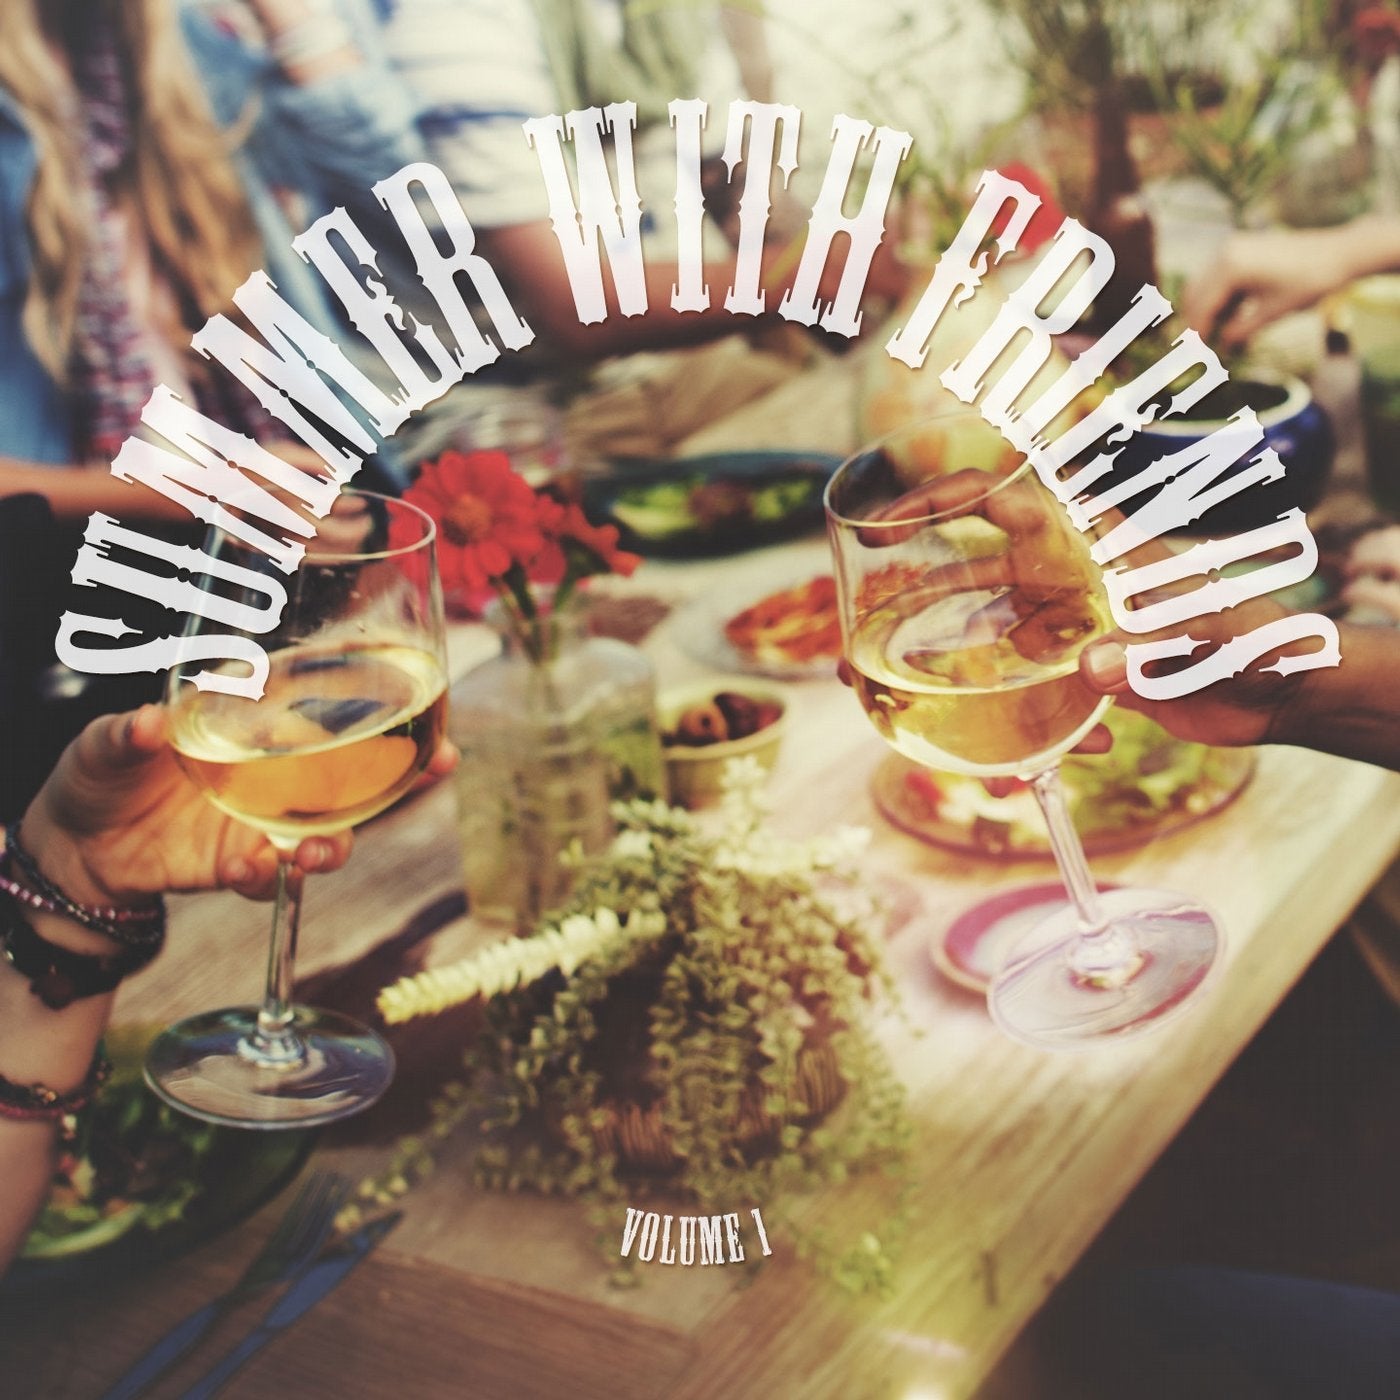 Summer With Friends, Vol. 1 (Relaxing Summer Grooves)